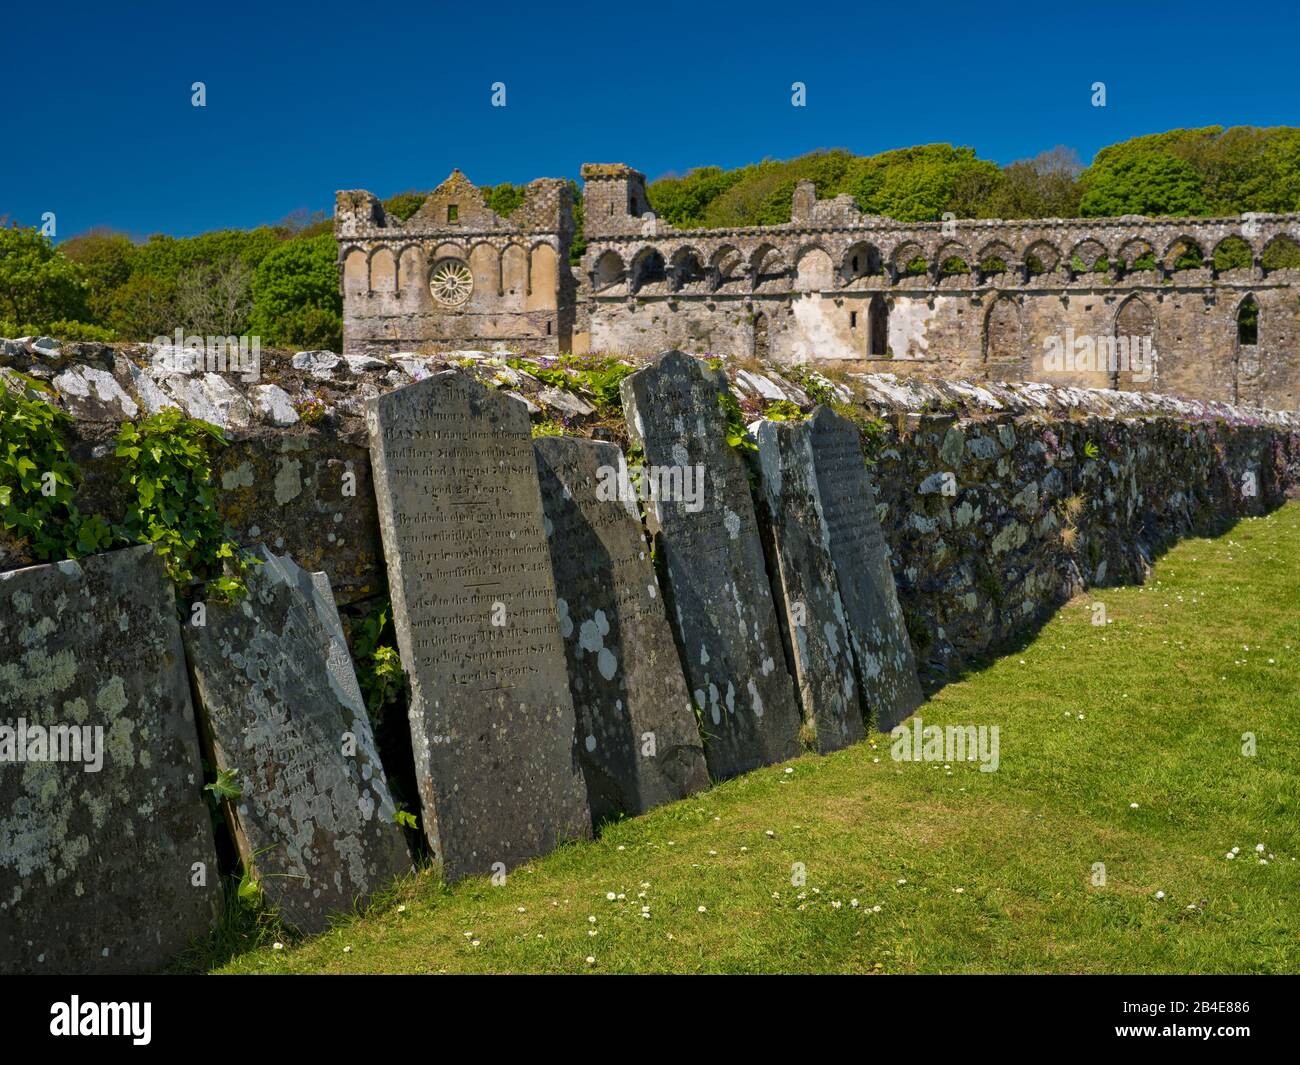 Europe, UK, UK, Wales, Pembrokeshire Coast, St. David's, Monastery with old gravestones on wall in front of ruin Bishops Palace Stock Photo